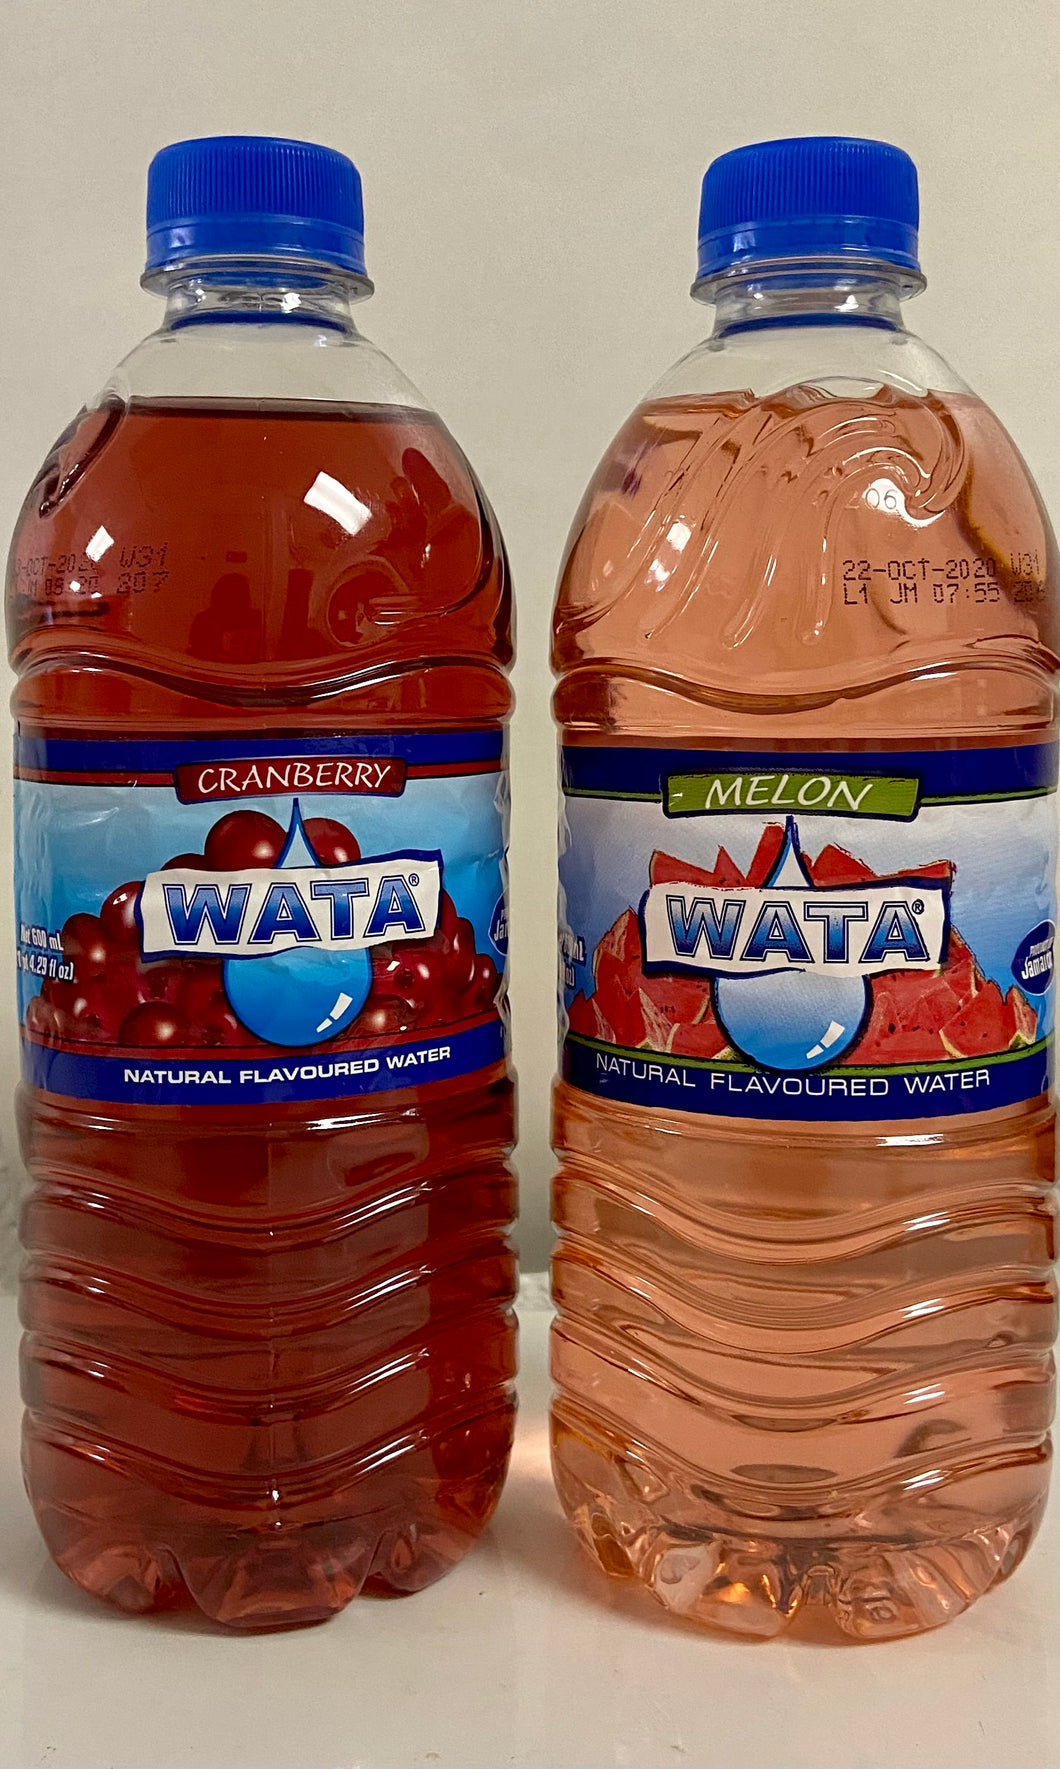 Natural Flavoured Water, Cranberry or Melon, WATA